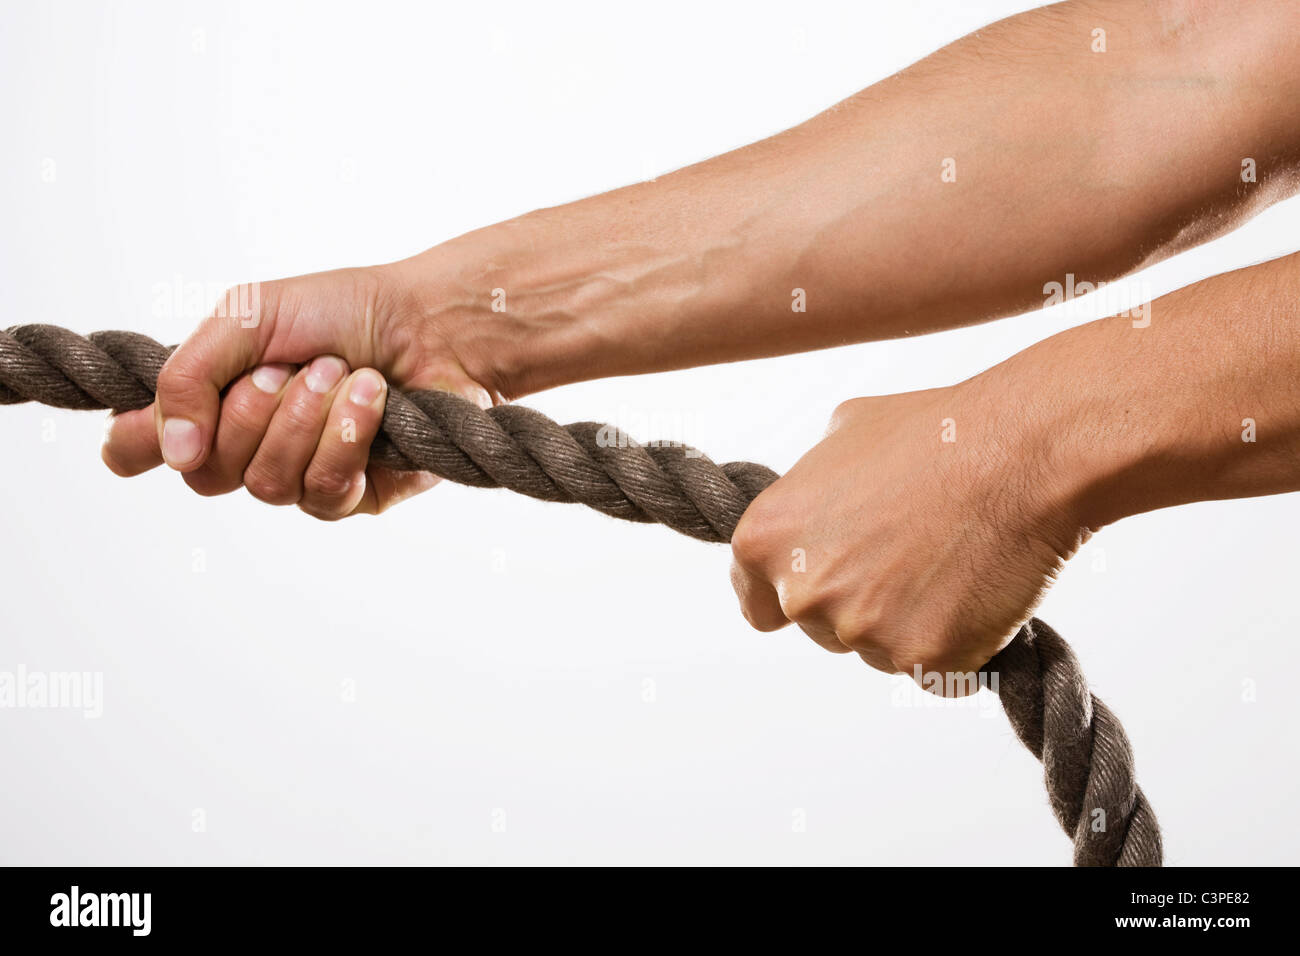 Person pulling rope, close-up Stock Photo